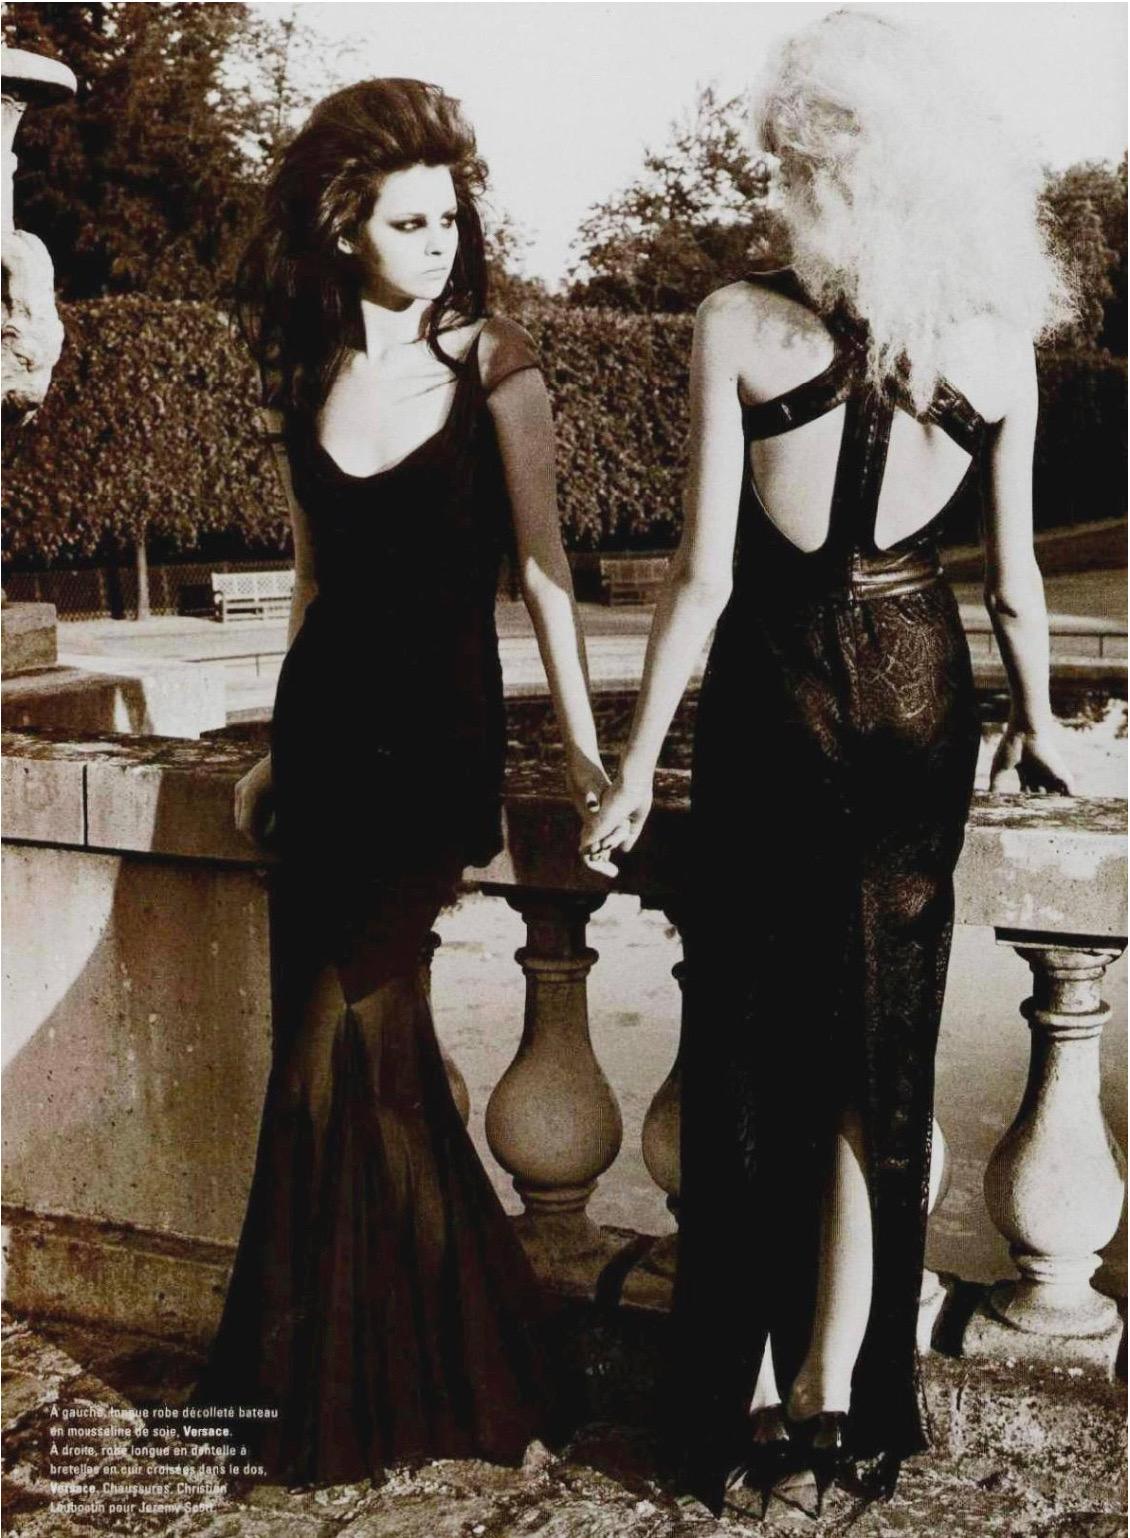 A highly coveted and ultra seductive Gianni Versace semi-sheer black silk chiffon bias-cut floor length gown dating back to Donatella Versace's iconic 2001 fall-winter collection. This exceptional dress is documented runway look #59. The garment